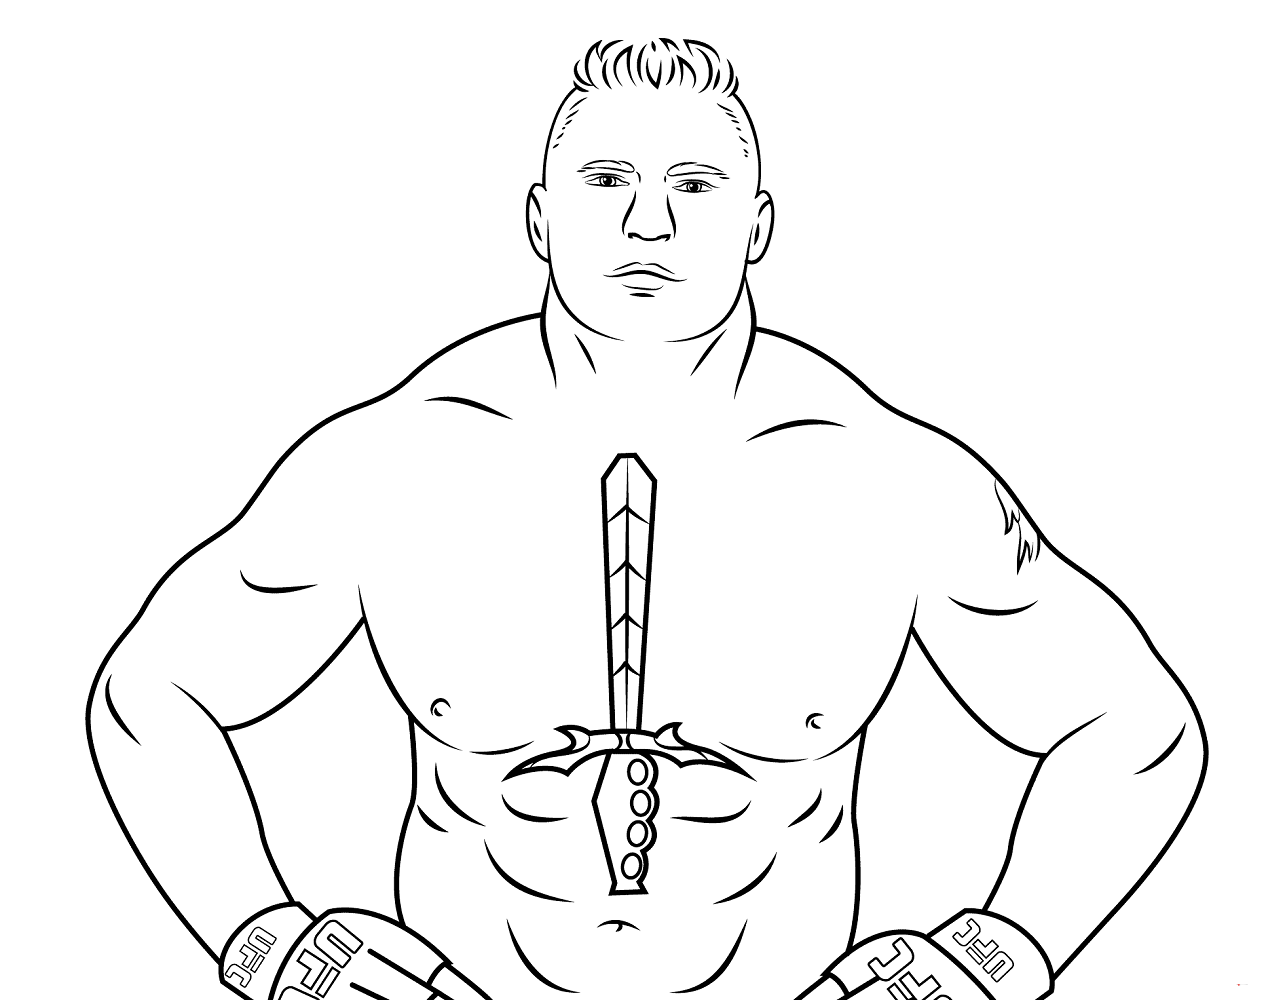 wwe printables the best free wwe drawing images download from 614 free printables wwe 